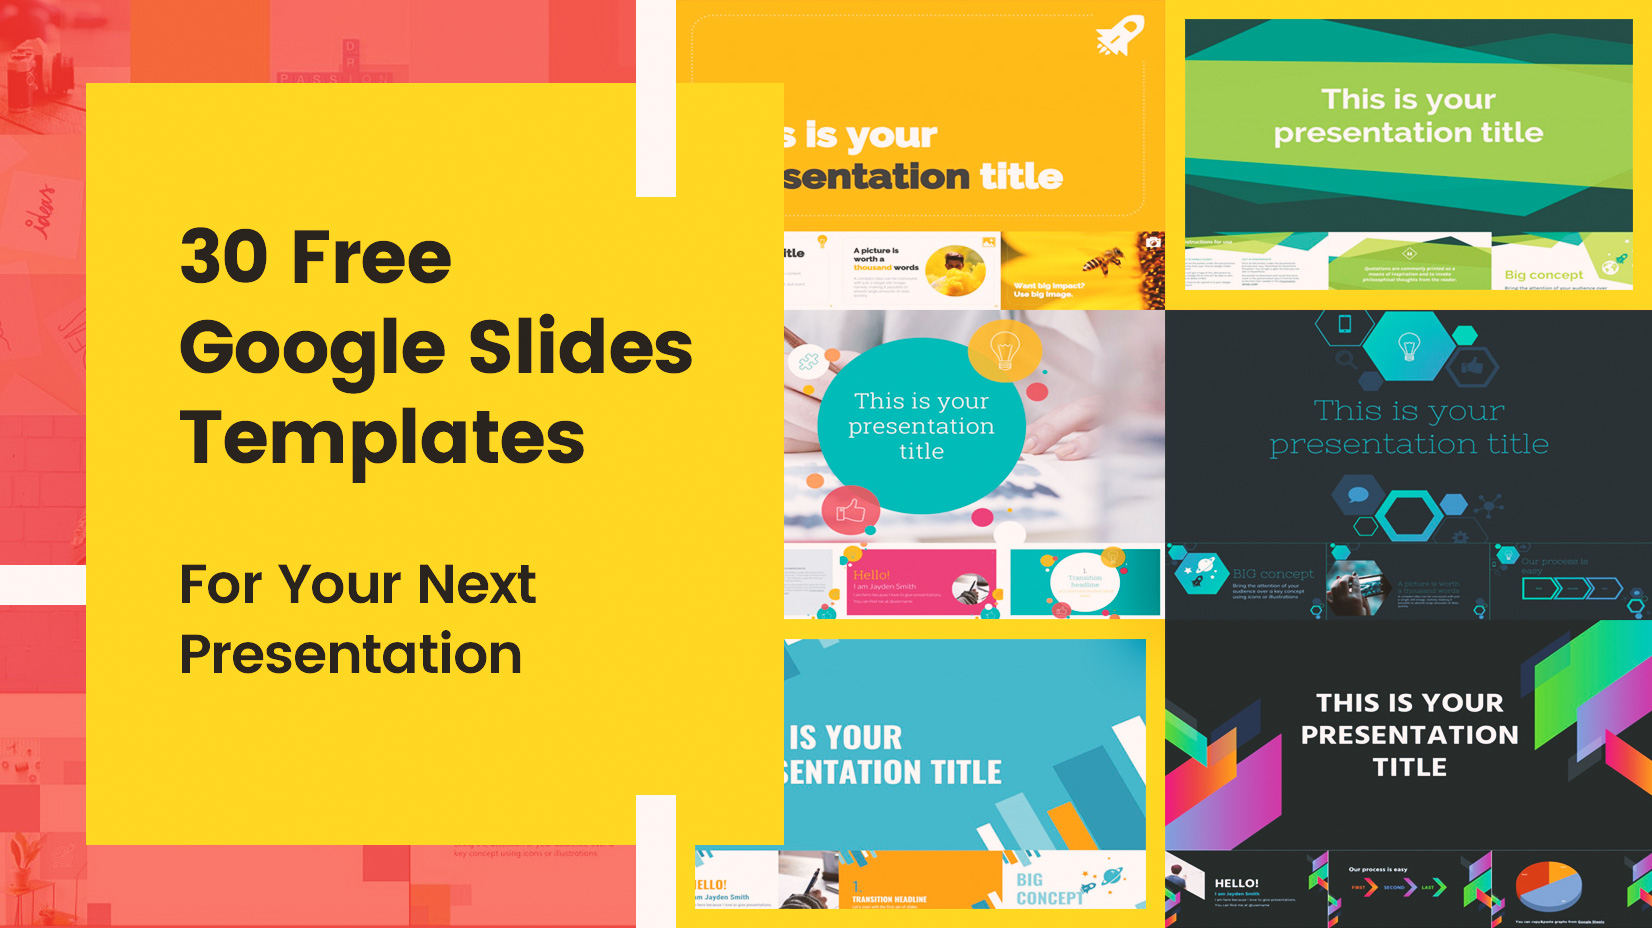 30 Free Google Slides Templates For Your Next Presentation Intended For Powerpoint Slides Design Templates For Free